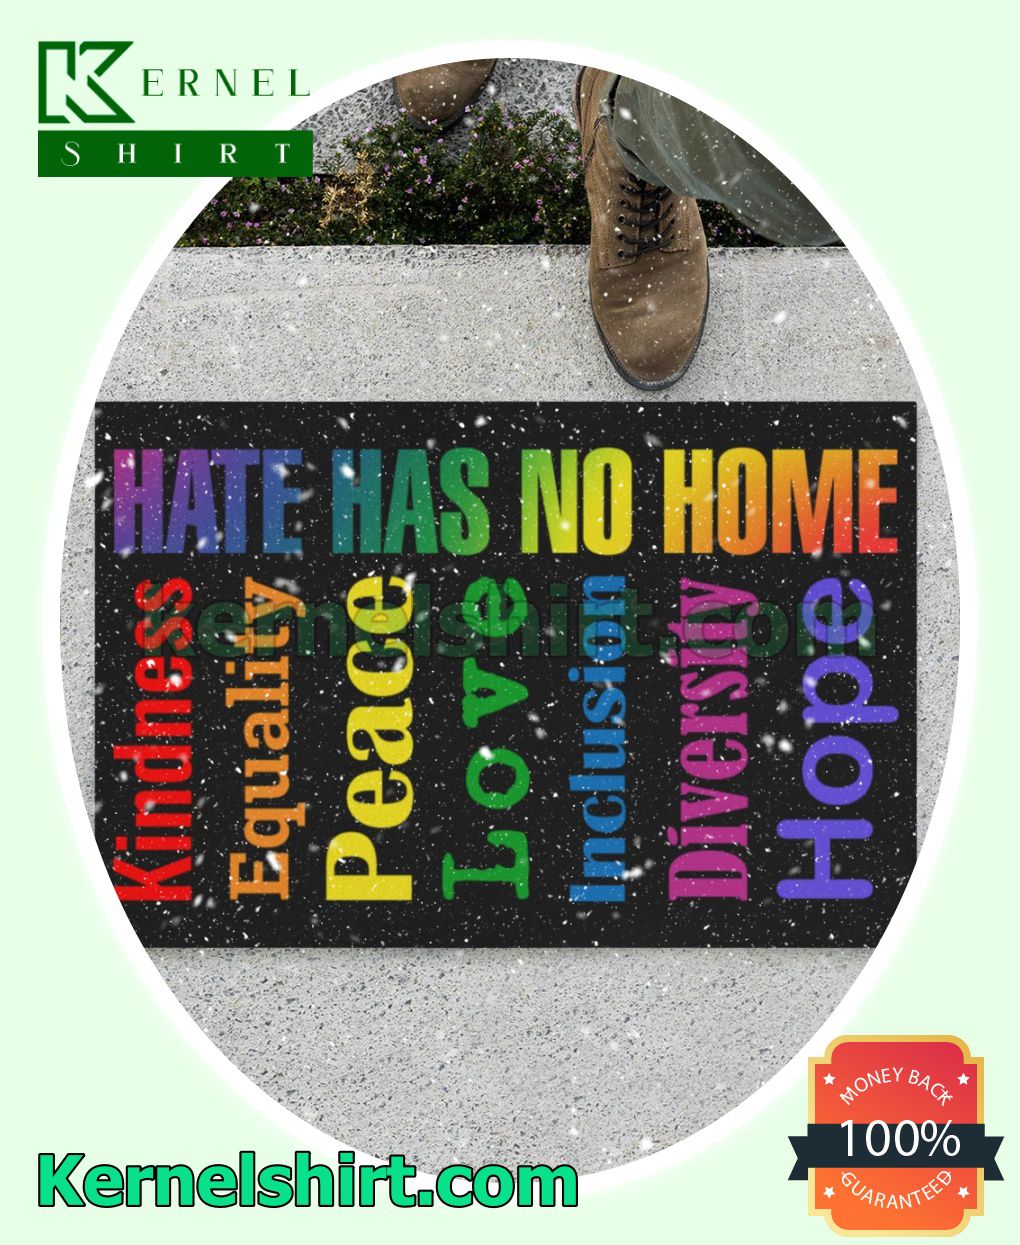 Hate Has No Home Kindness Equality Peace Love Inclusion Diversity Hope Indoor Outdoor Door Rug a